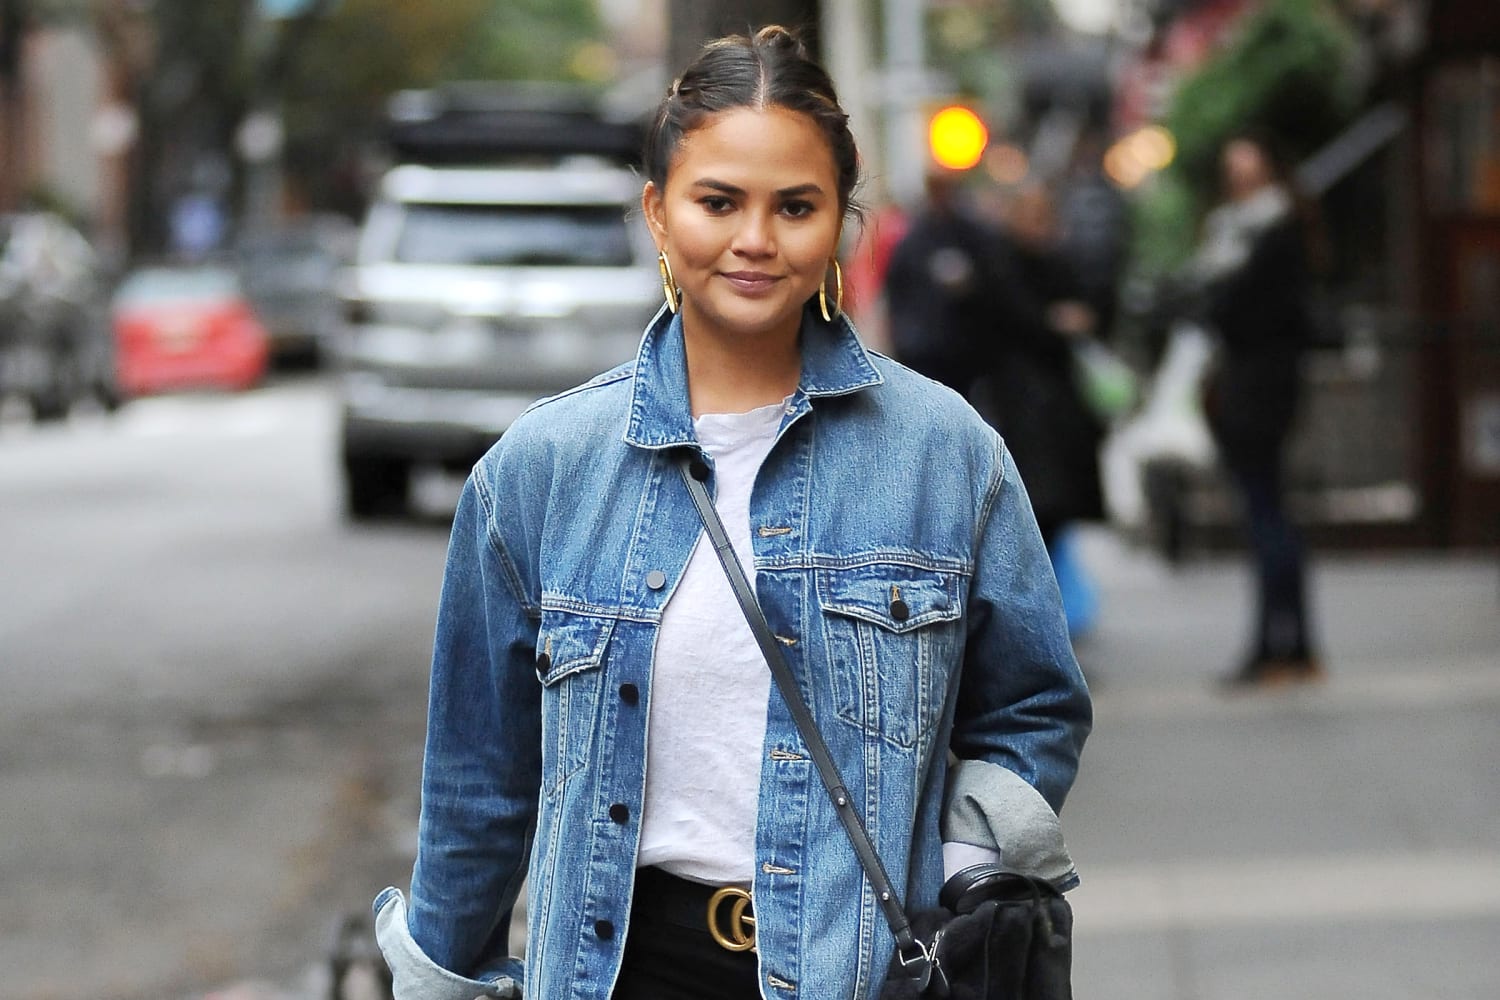 Check Some of this Week's Best Celeb Bags, Plus a Special Appearance from  Chrissy Teigen's Bulldog - PurseBlog